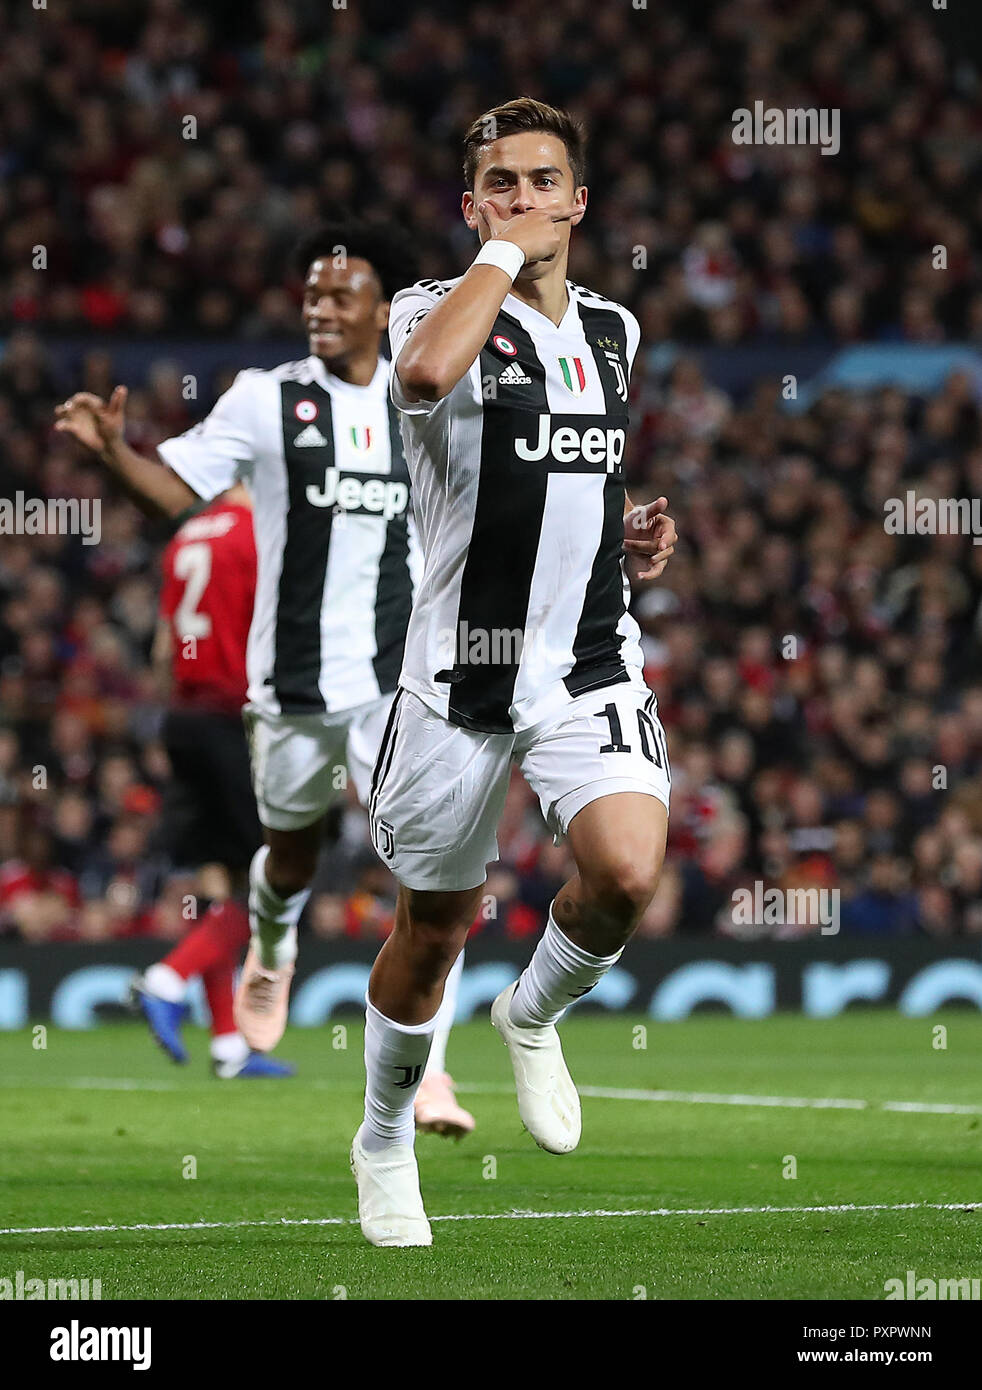 Juventus' Paulo Dybala celebrates scoring his side's first goal of the game  during the UEFA Champions League match at Old Trafford, Manchester Stock  Photo - Alamy